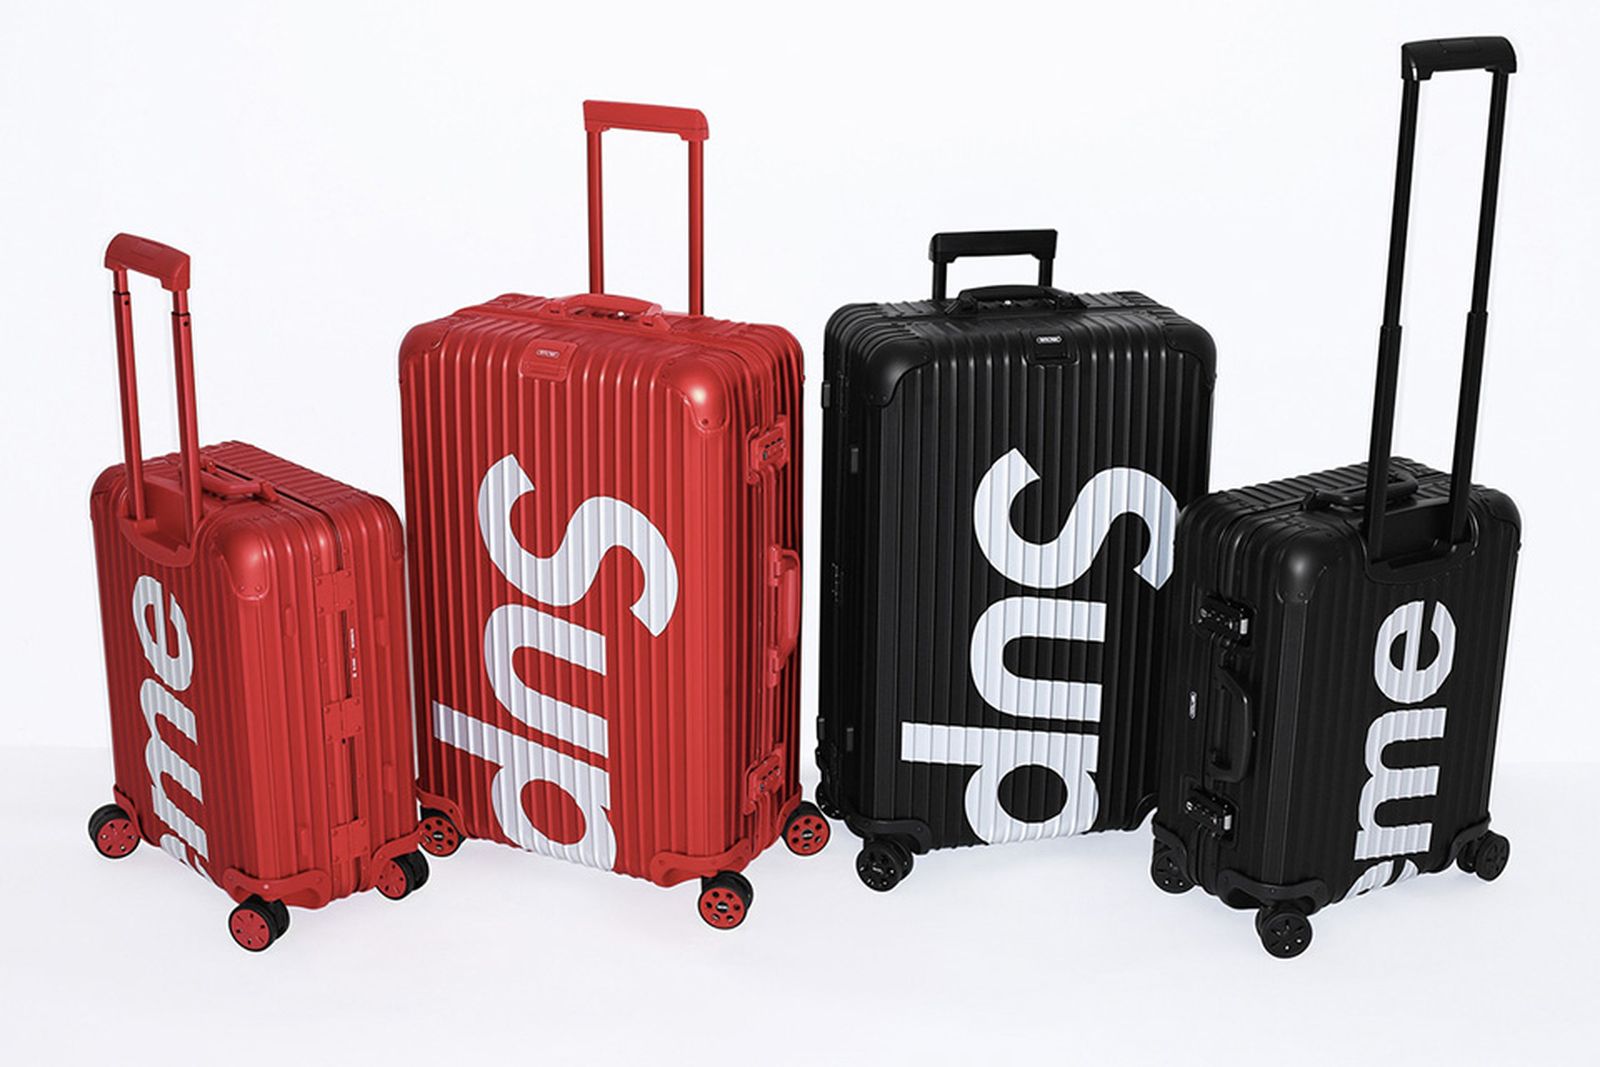 Supreme x Rimowa: The Suitcase Sold Out in 16 seconds